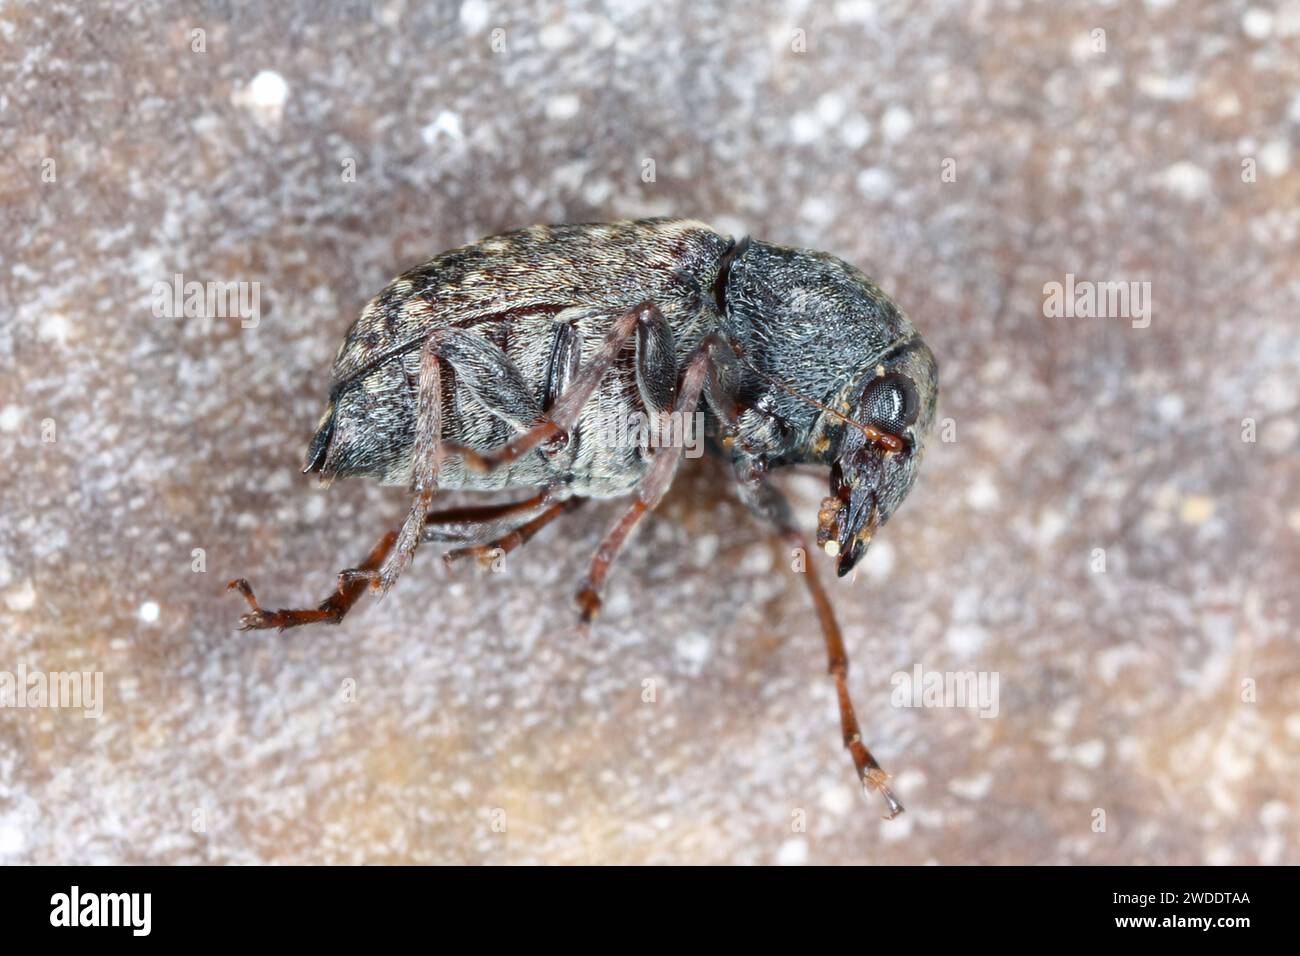 Araecerus fasciculatus, the coffee bean weevil, is a species of beetle (Coleoptera) belonging to the family Anthribidae. Causes significant damage to Stock Photo